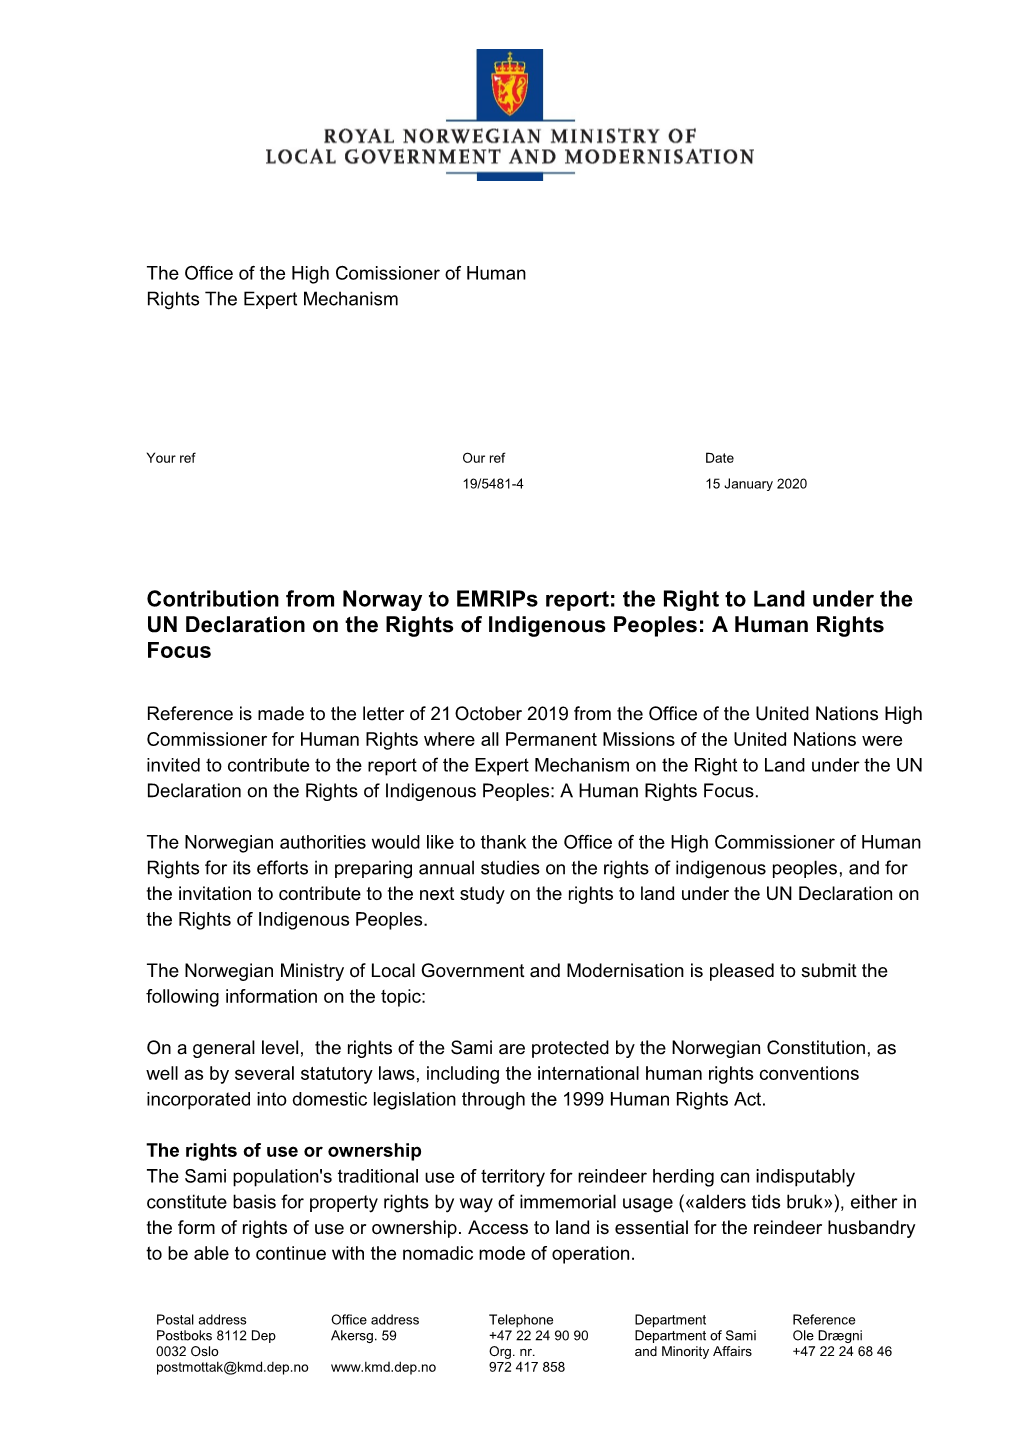 Contribution from Norway to Emrips Report: the Right to Land Under the UN Declaration on the Rights of Indigenous Peoples: a Human Rights Focus